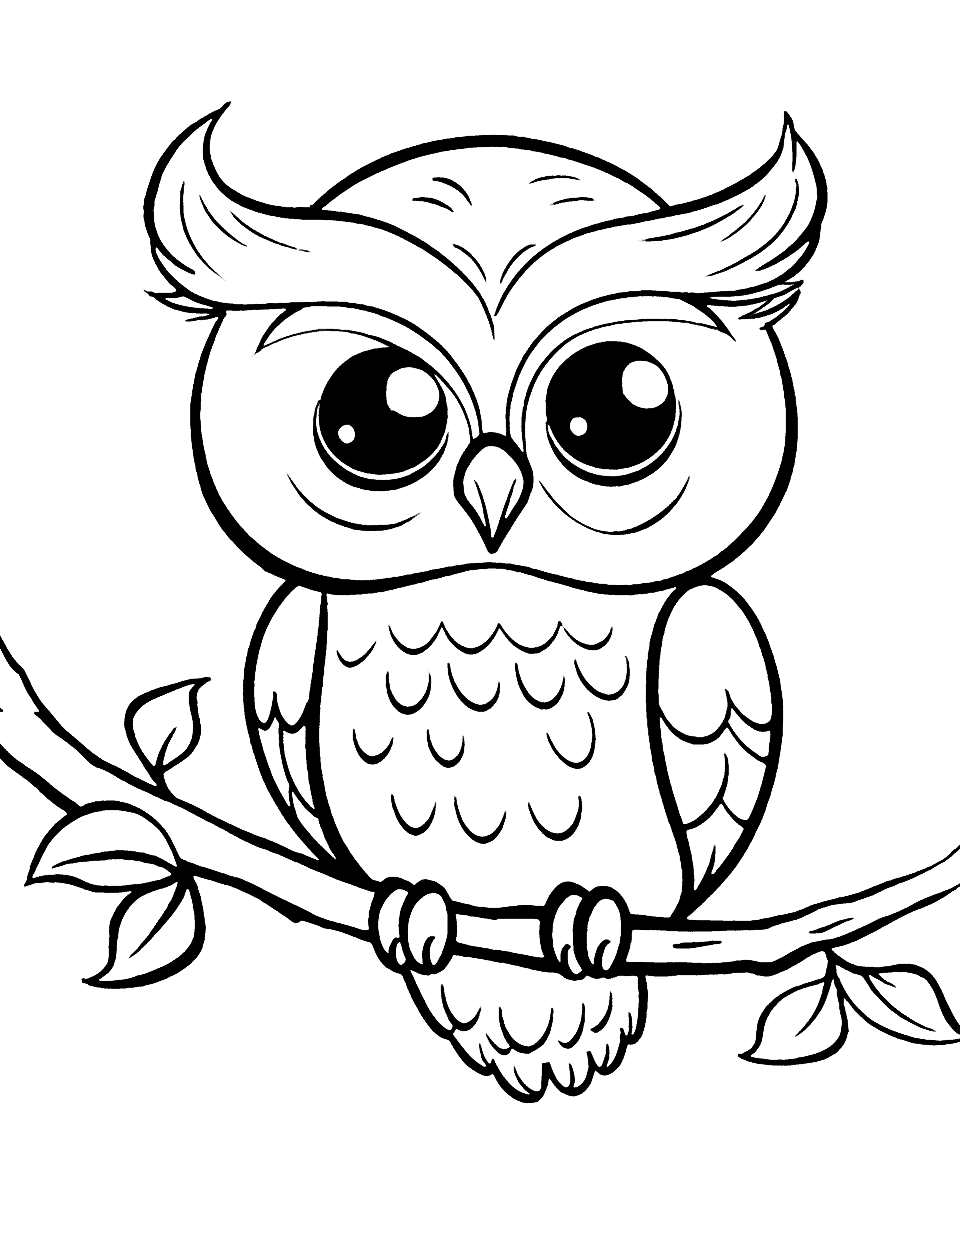 Cute Owl Perched on a Branch Coloring Page - An owl with big eyes sitting on a branch surrounded by leaves.